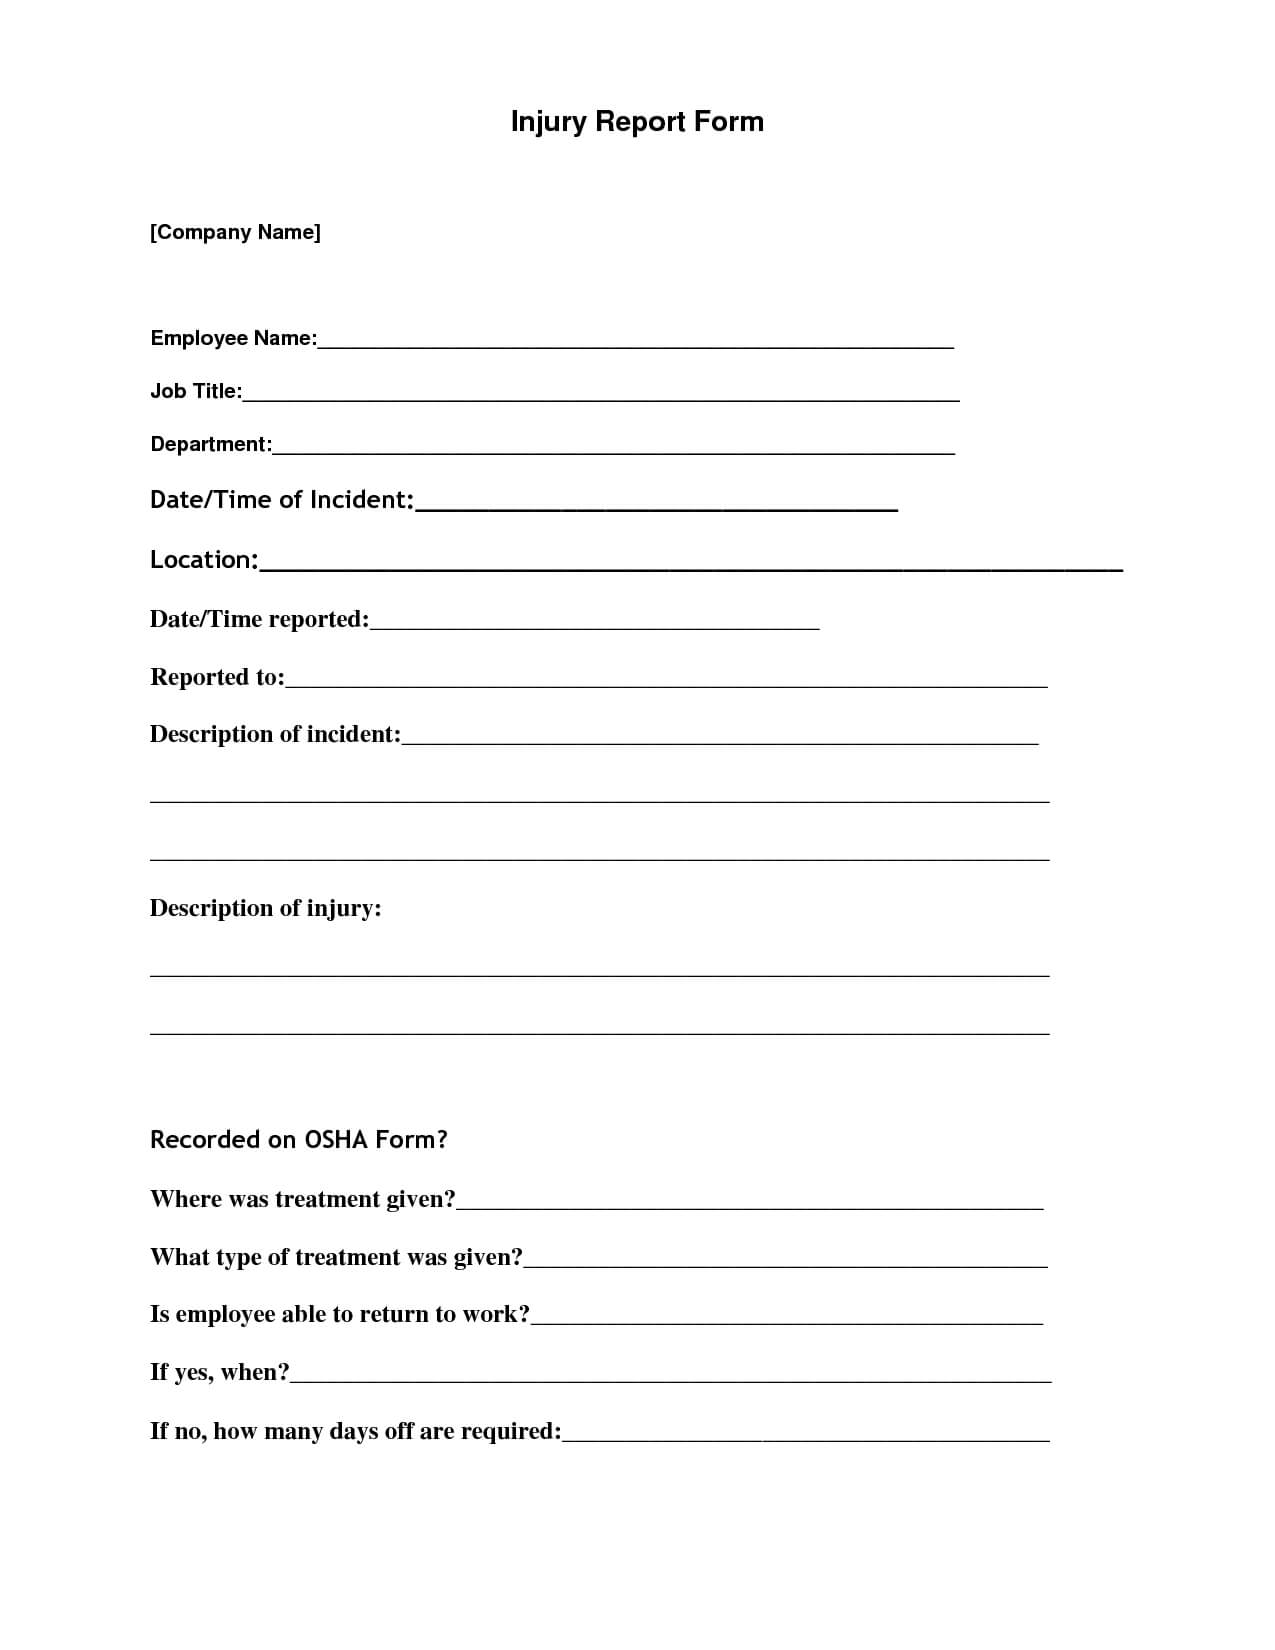 Injury Report Form Template With Injury Report Form Template